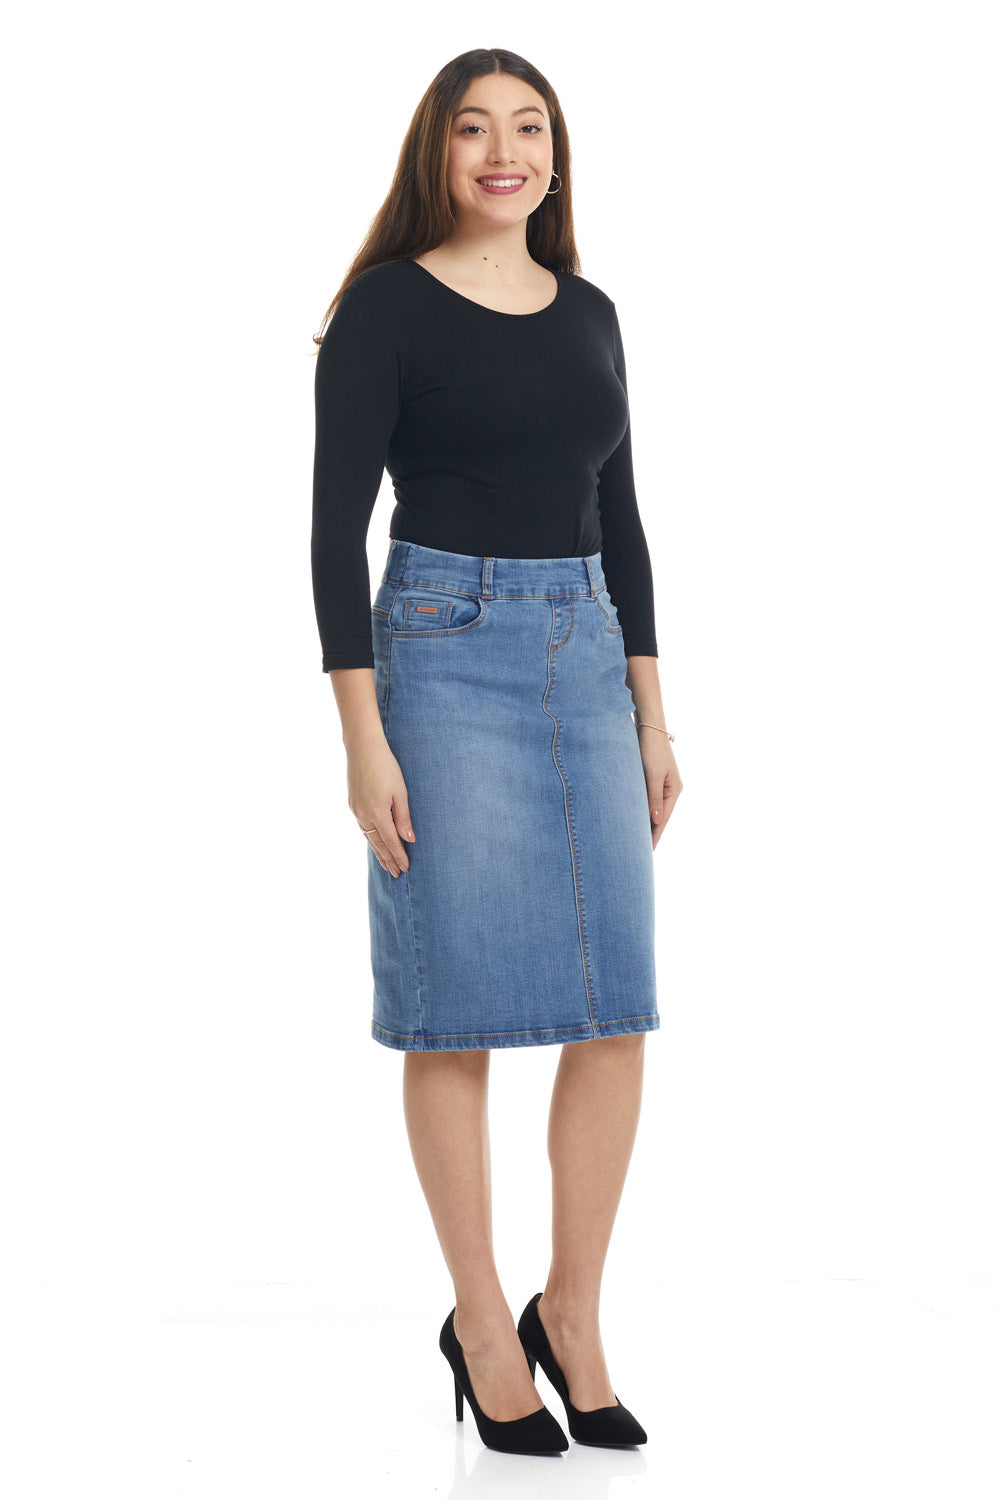 modest blue straight denim jean skirt for women with pockets and belt loops